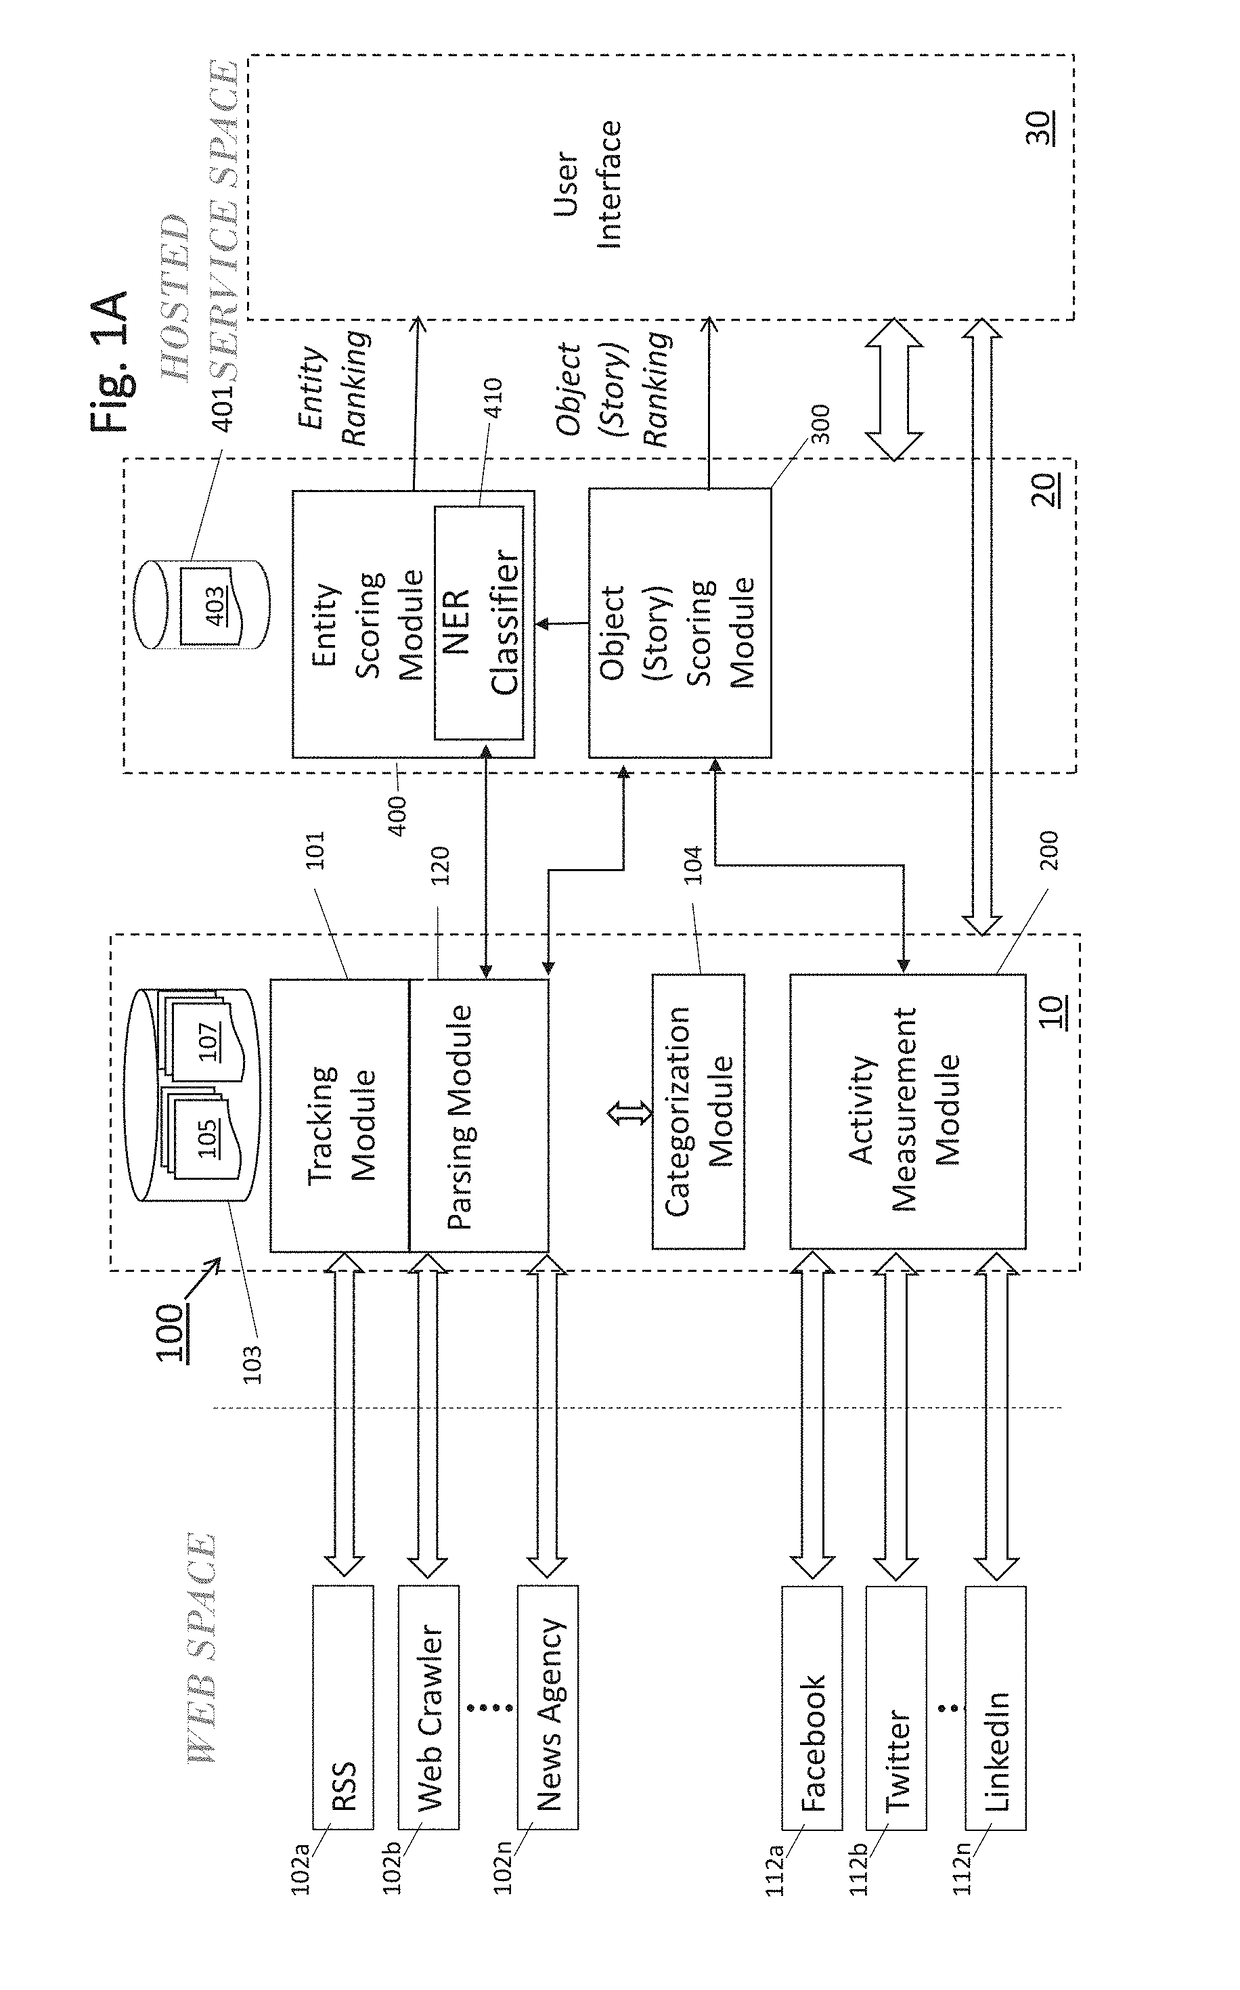 System and method for identifying and ranking trending named entities in digital content objects